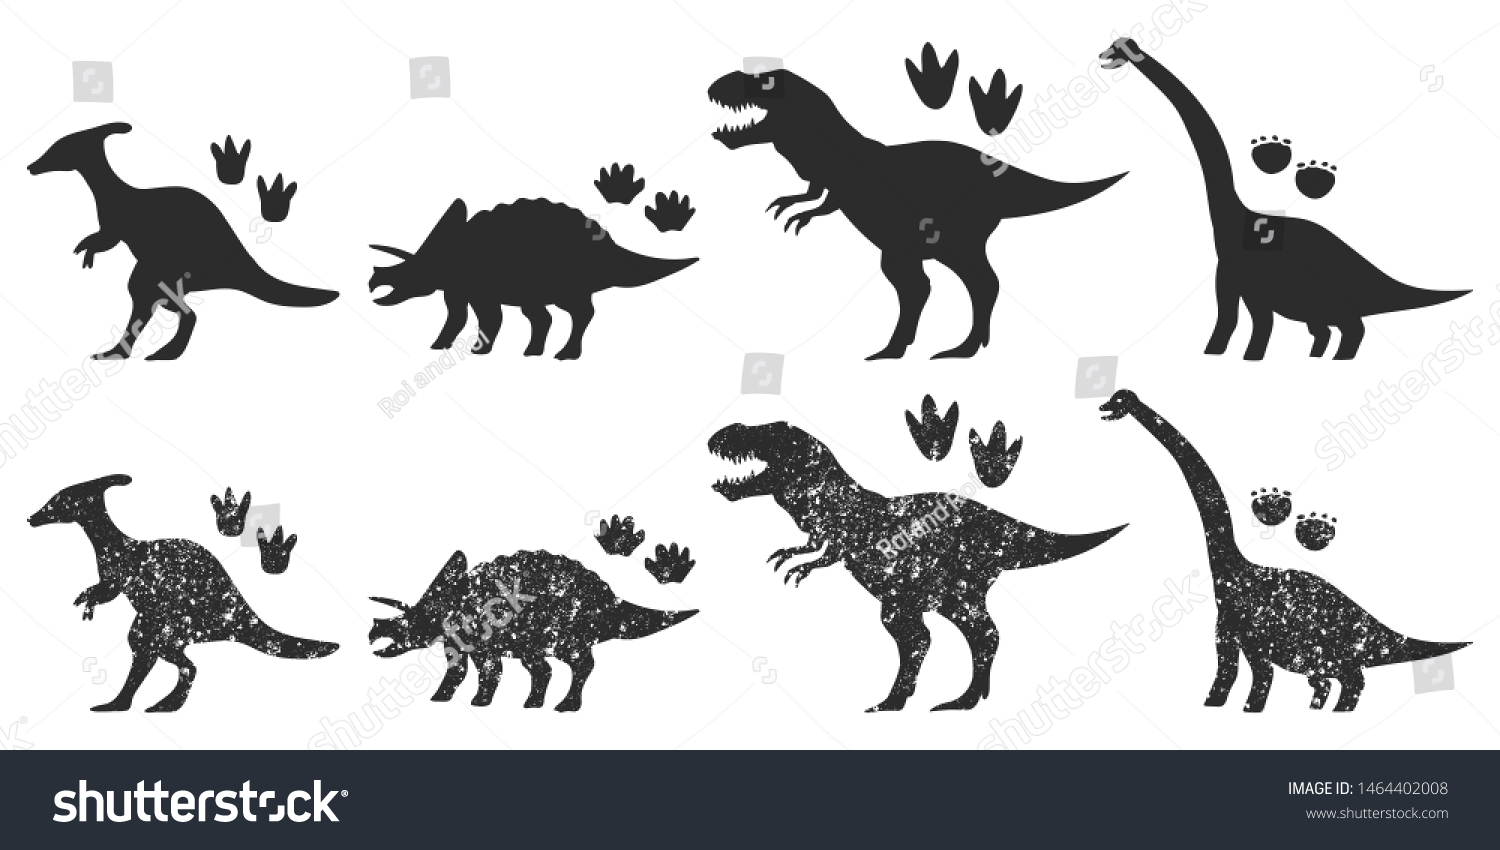 SVG of Dinosaurs and footprints black silhouette vector set isolated on a white background. svg